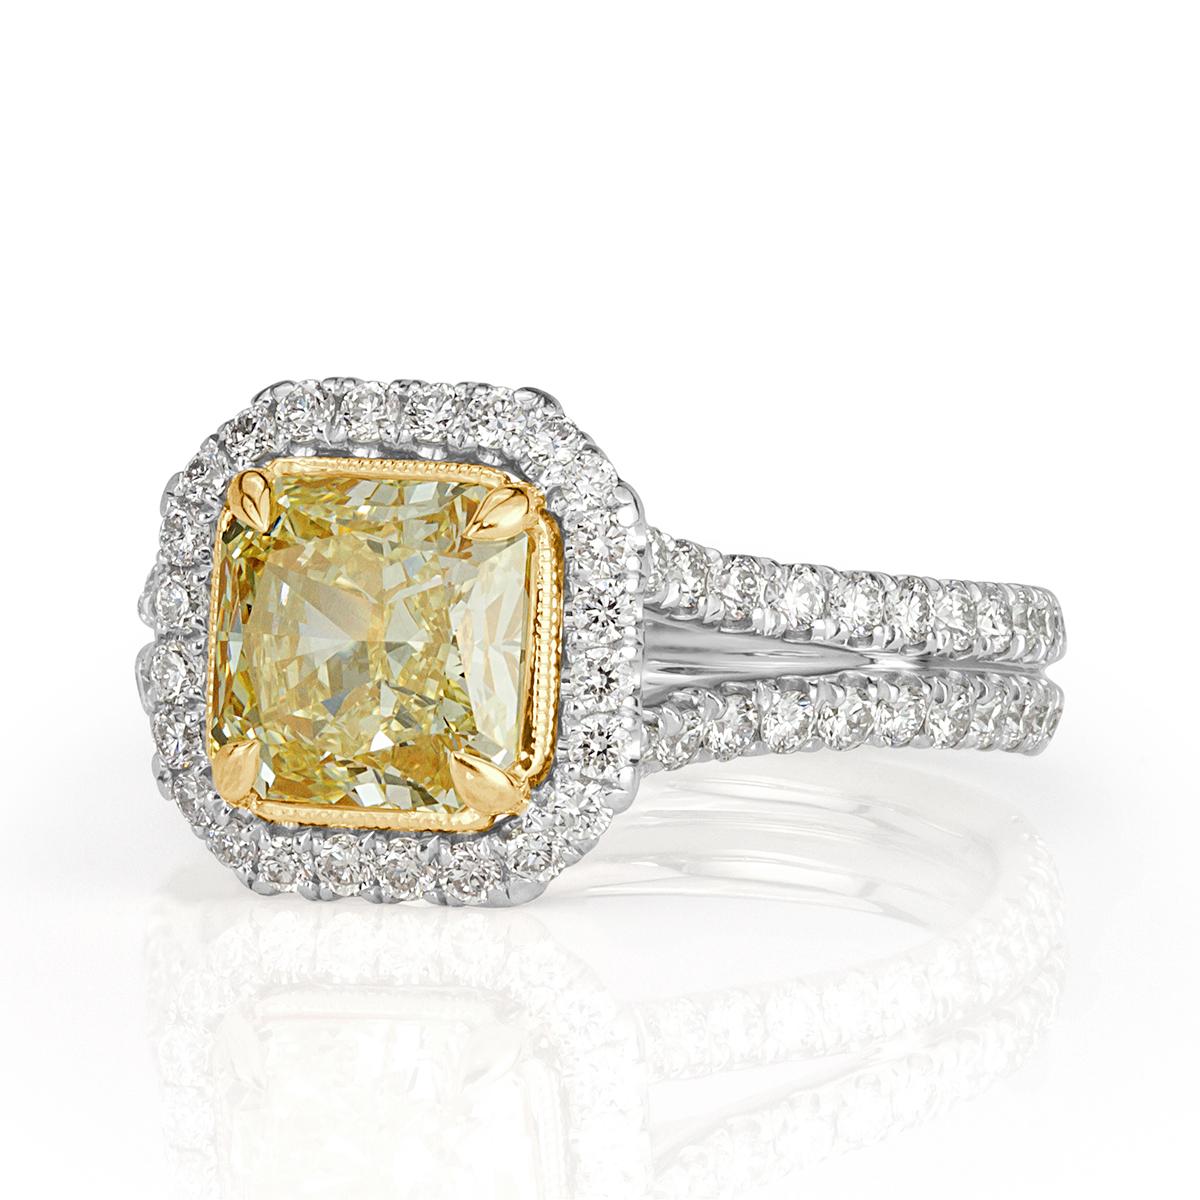 Designed in platinum, this gorgeous diamond engagement ring showcases a a gorgeous 1.38ct radiant cut center diamond, GIA certified at Fancy Yellow-VS1. It is complimented by a sparkling halo of white, round brilliant cut diamonds as well as two